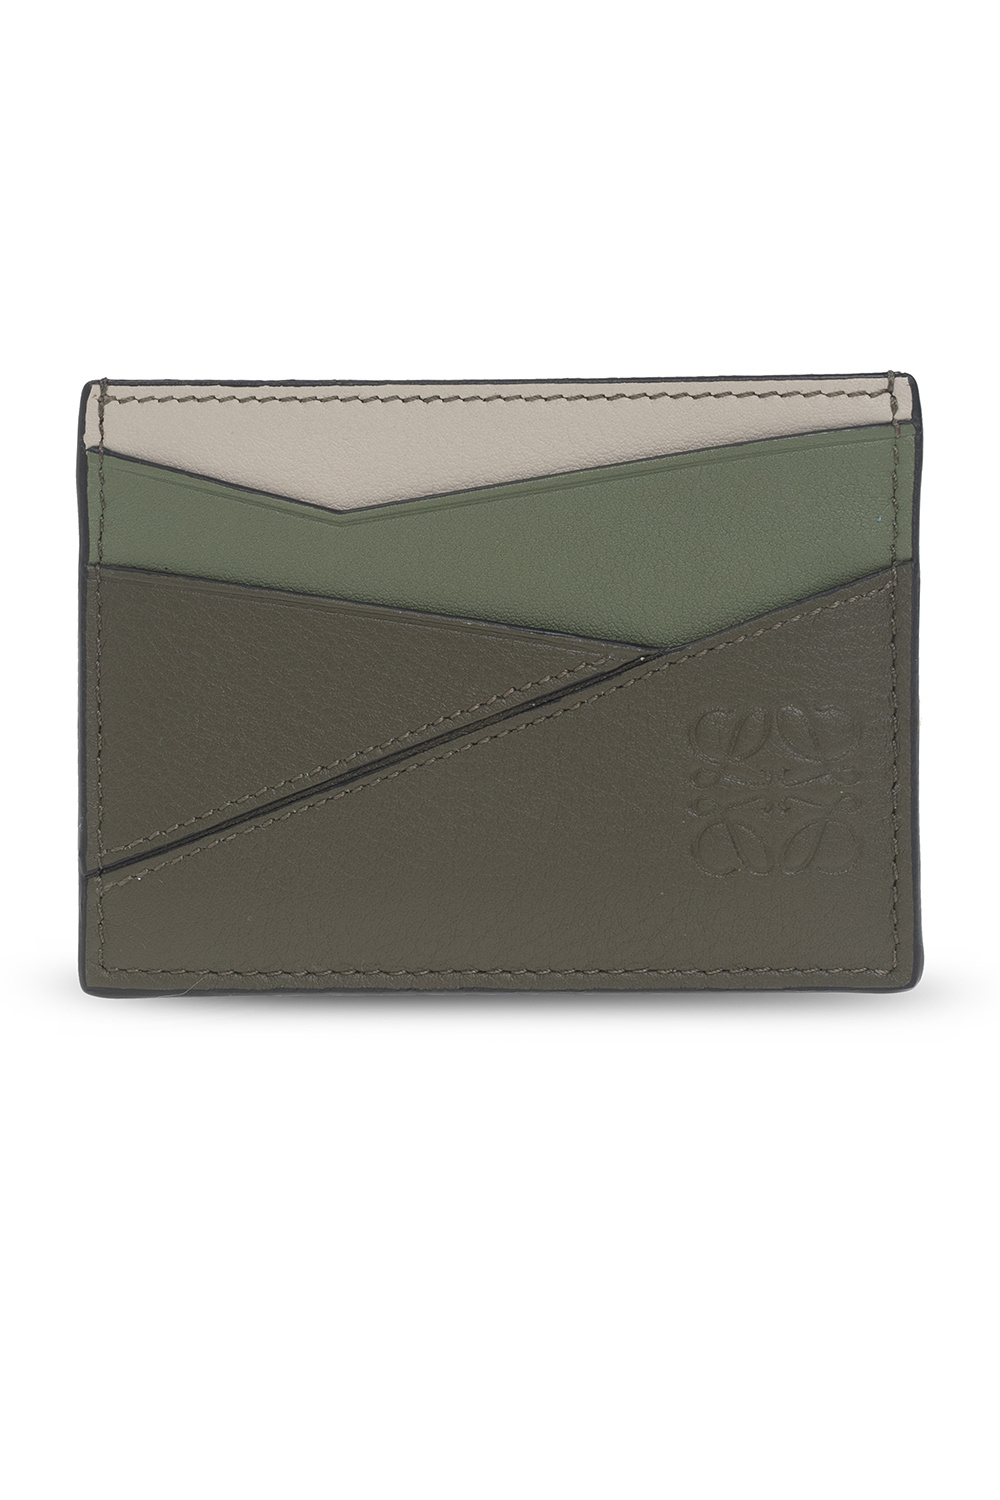 Loewe ‘Puzzle’ leather card case